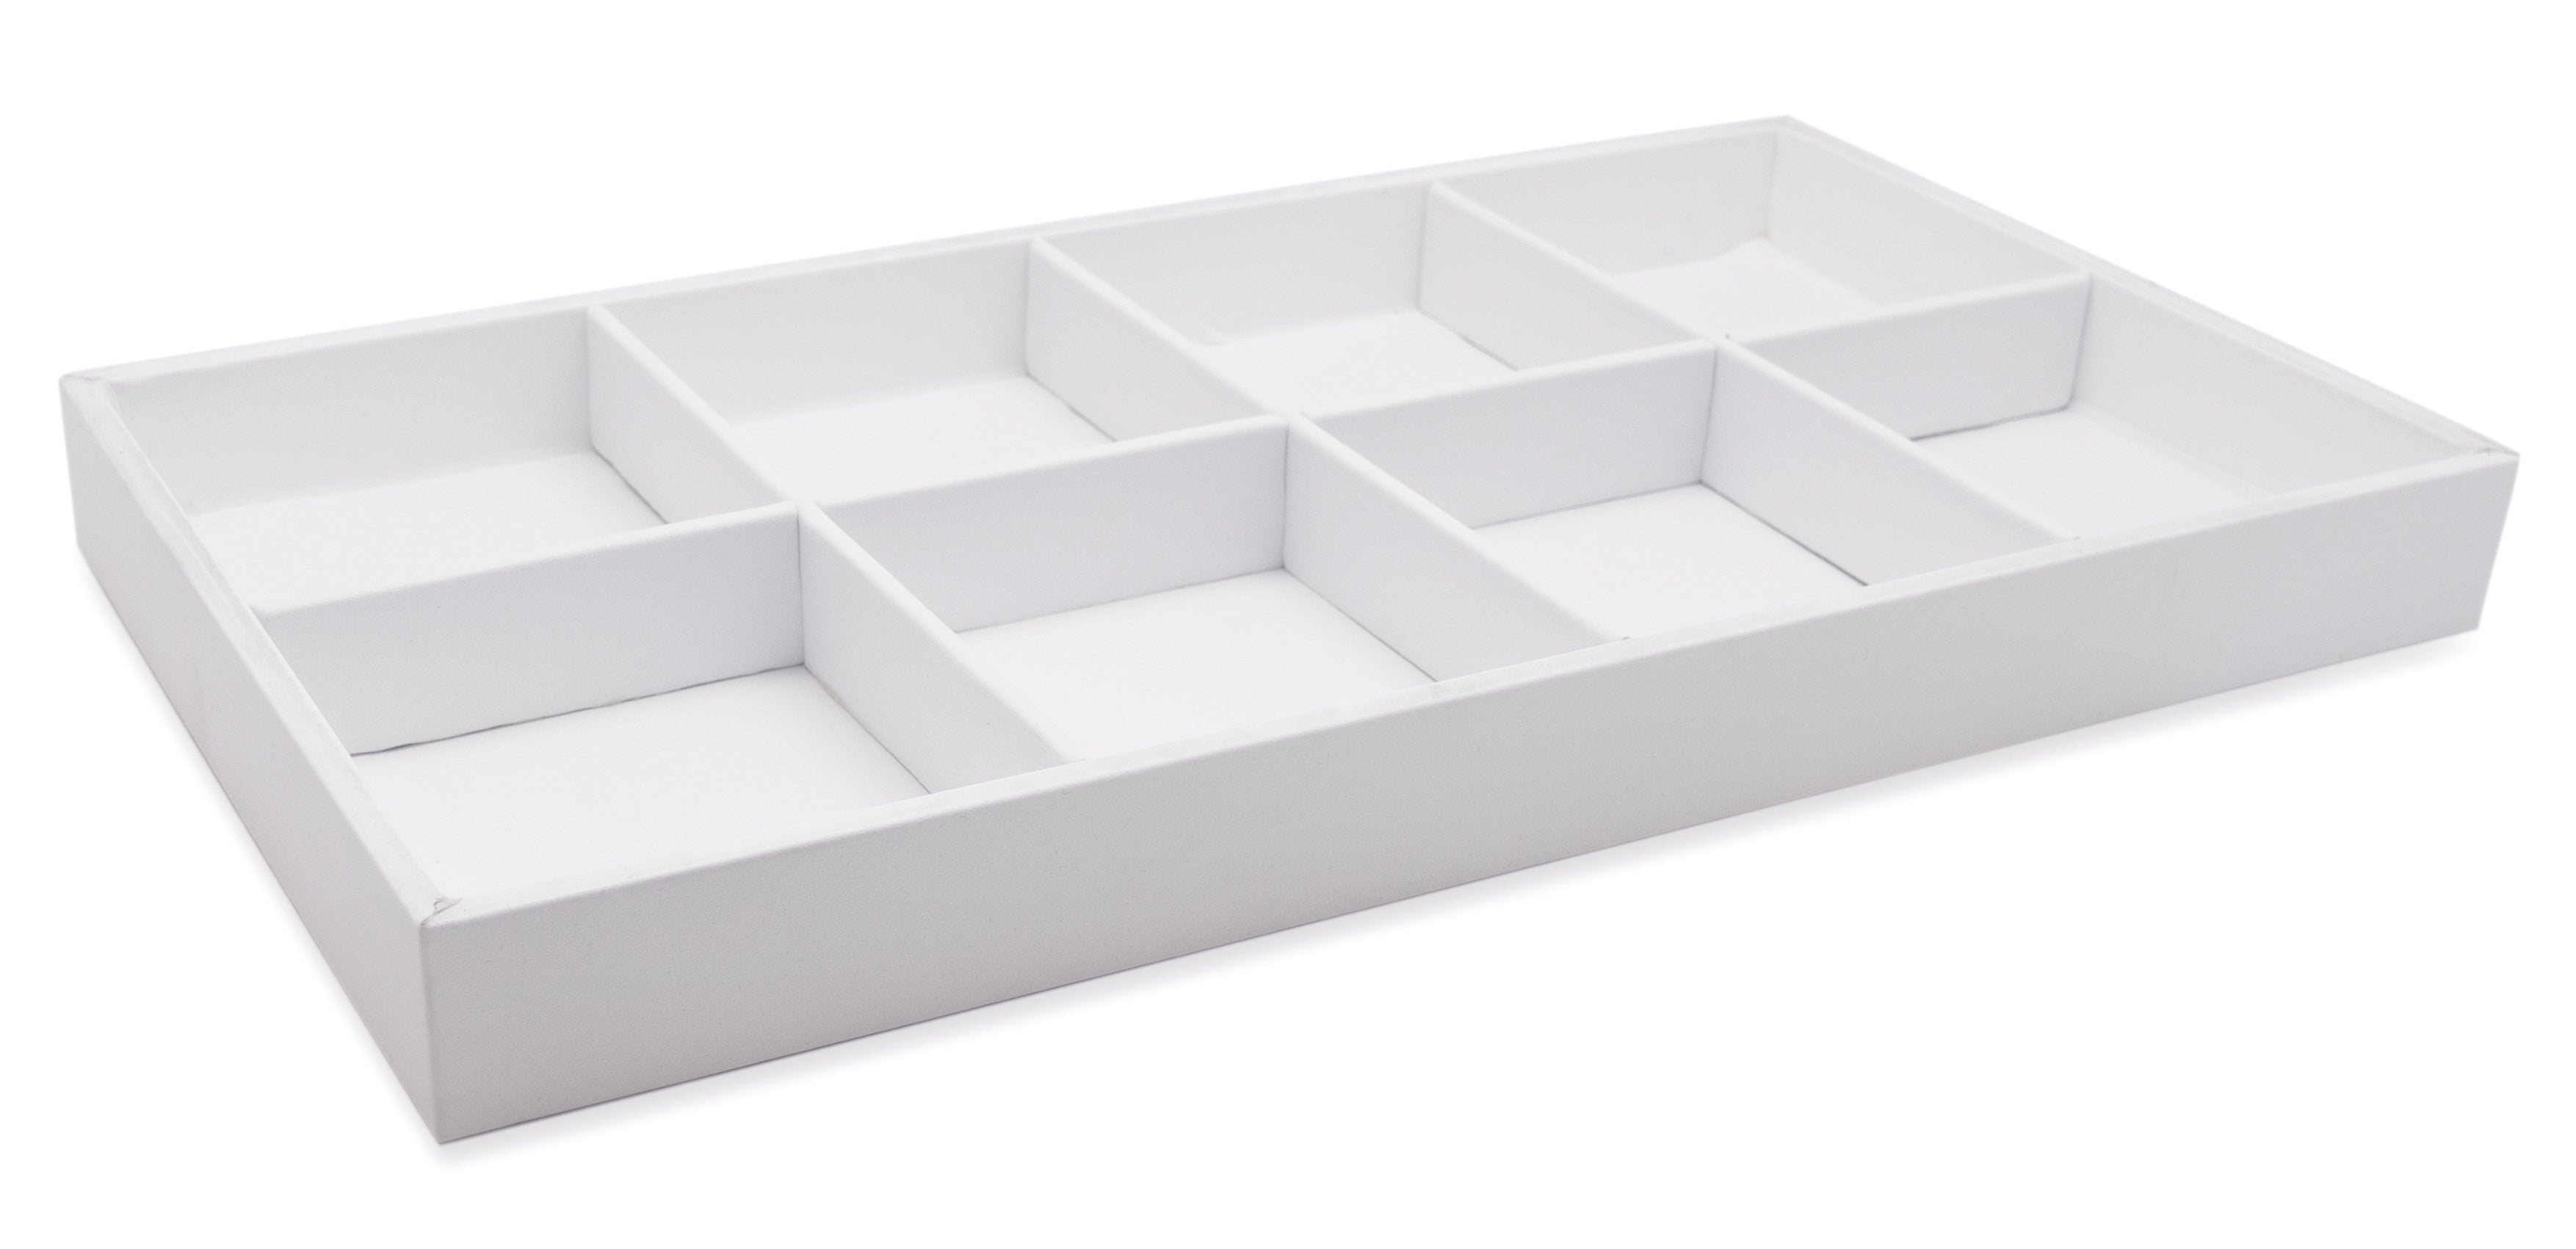 NicePackaging 24 Compartment White Leatherette Sorting Tray with  Free-standing White Plastic Display Tray For Sales / Showcase / Home /  Store Use 